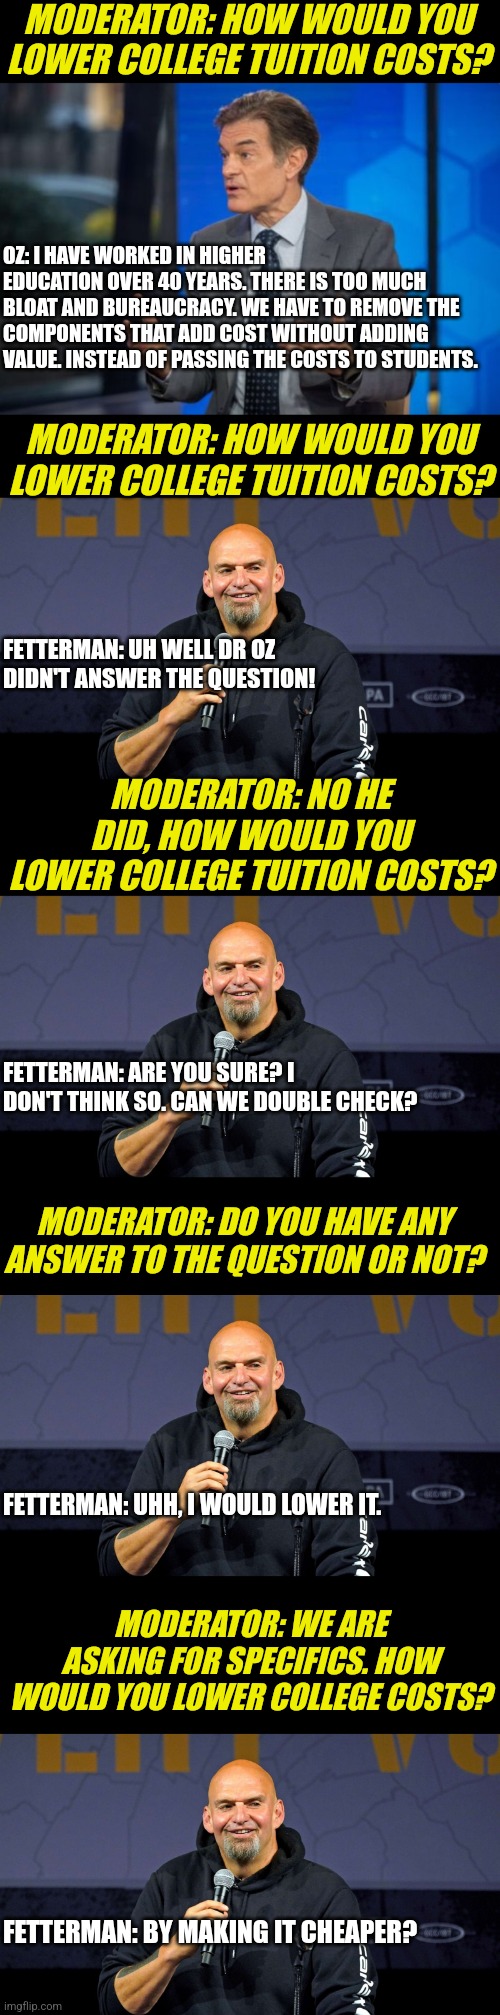 The legendary Oz-Fetterman debate summarized!!!! | MODERATOR: HOW WOULD YOU LOWER COLLEGE TUITION COSTS? OZ: I HAVE WORKED IN HIGHER EDUCATION OVER 40 YEARS. THERE IS TOO MUCH BLOAT AND BUREAUCRACY. WE HAVE TO REMOVE THE COMPONENTS THAT ADD COST WITHOUT ADDING VALUE. INSTEAD OF PASSING THE COSTS TO STUDENTS. MODERATOR: HOW WOULD YOU LOWER COLLEGE TUITION COSTS? FETTERMAN: UH WELL DR OZ DIDN'T ANSWER THE QUESTION! MODERATOR: NO HE DID, HOW WOULD YOU LOWER COLLEGE TUITION COSTS? FETTERMAN: ARE YOU SURE? I DON'T THINK SO. CAN WE DOUBLE CHECK? MODERATOR: DO YOU HAVE ANY ANSWER TO THE QUESTION OR NOT? FETTERMAN: UHH, I WOULD LOWER IT. MODERATOR: WE ARE ASKING FOR SPECIFICS. HOW WOULD YOU LOWER COLLEGE COSTS? FETTERMAN: BY MAKING IT CHEAPER? | image tagged in dr oz,john fetterman,debate,horror,politics,pennsylvania | made w/ Imgflip meme maker